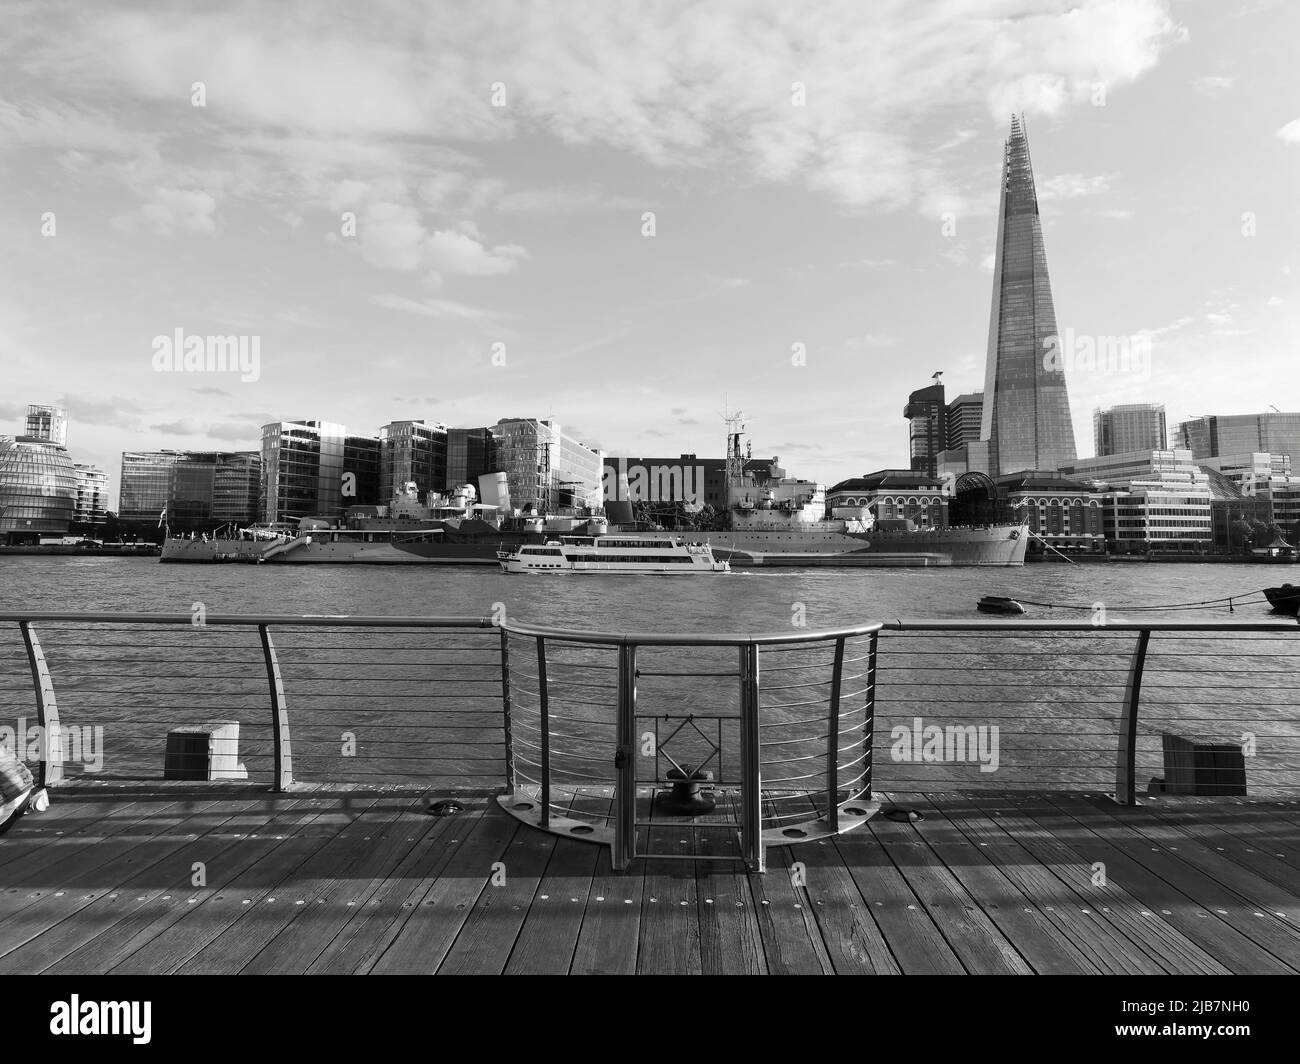 London, Greater London, England, May 21 2022: View towards Southwark with HMS Belfast and The Shard, as seen from the north bank of the River Thames. Stock Photo